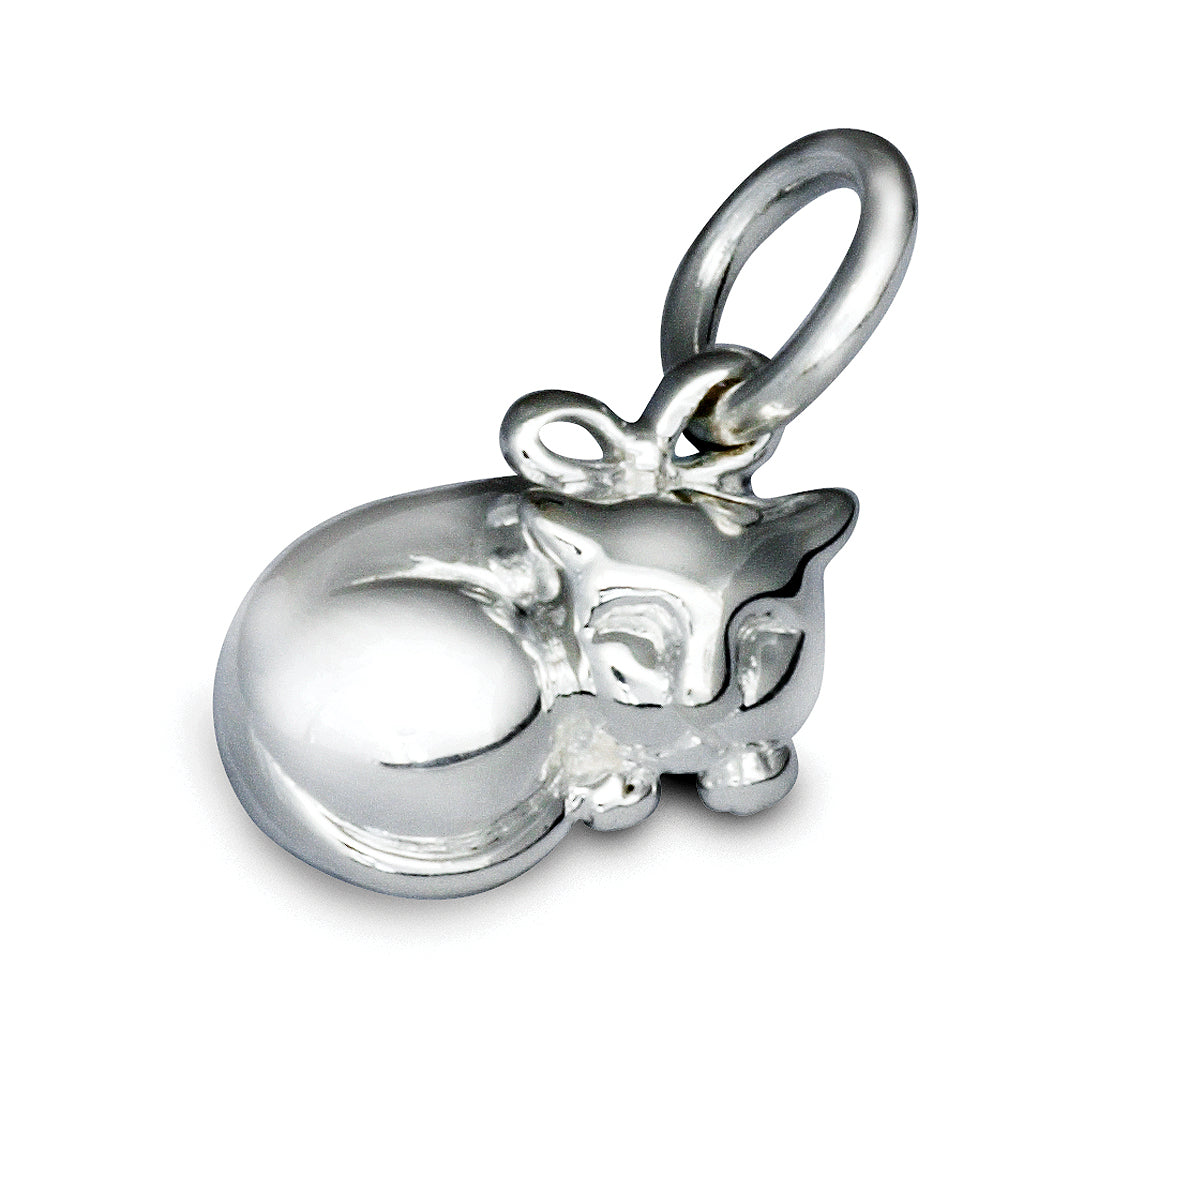 Cat Sterling Silver Charm for bracelet or necklace from Scarlett Jewellery